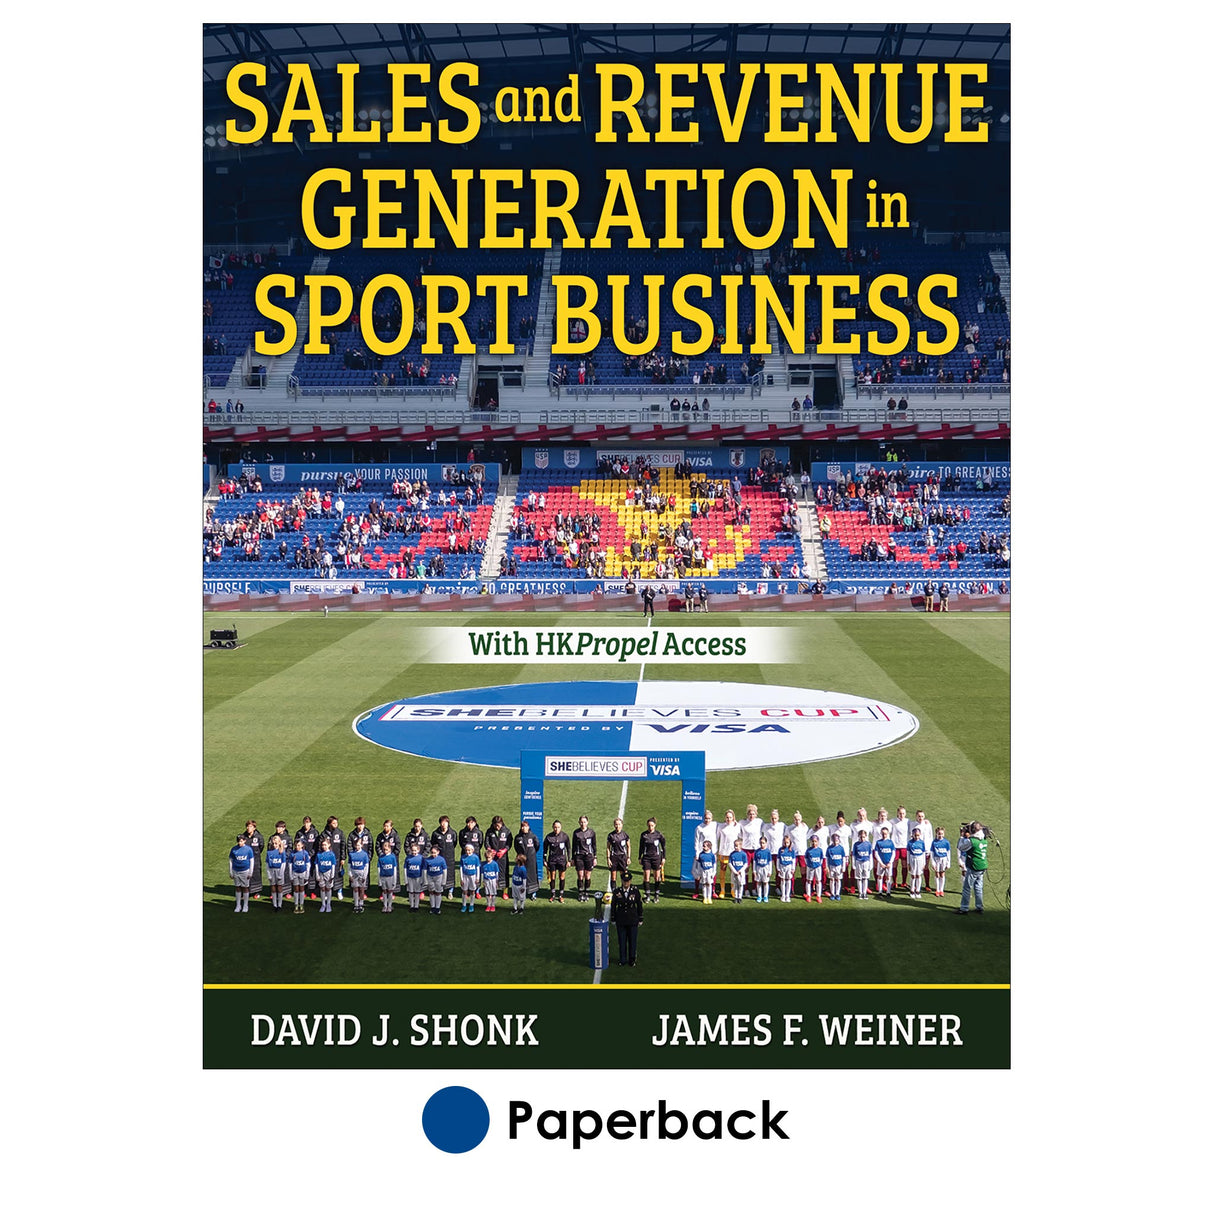 Sales and Revenue Generation in Sport Business With HKPropel Access